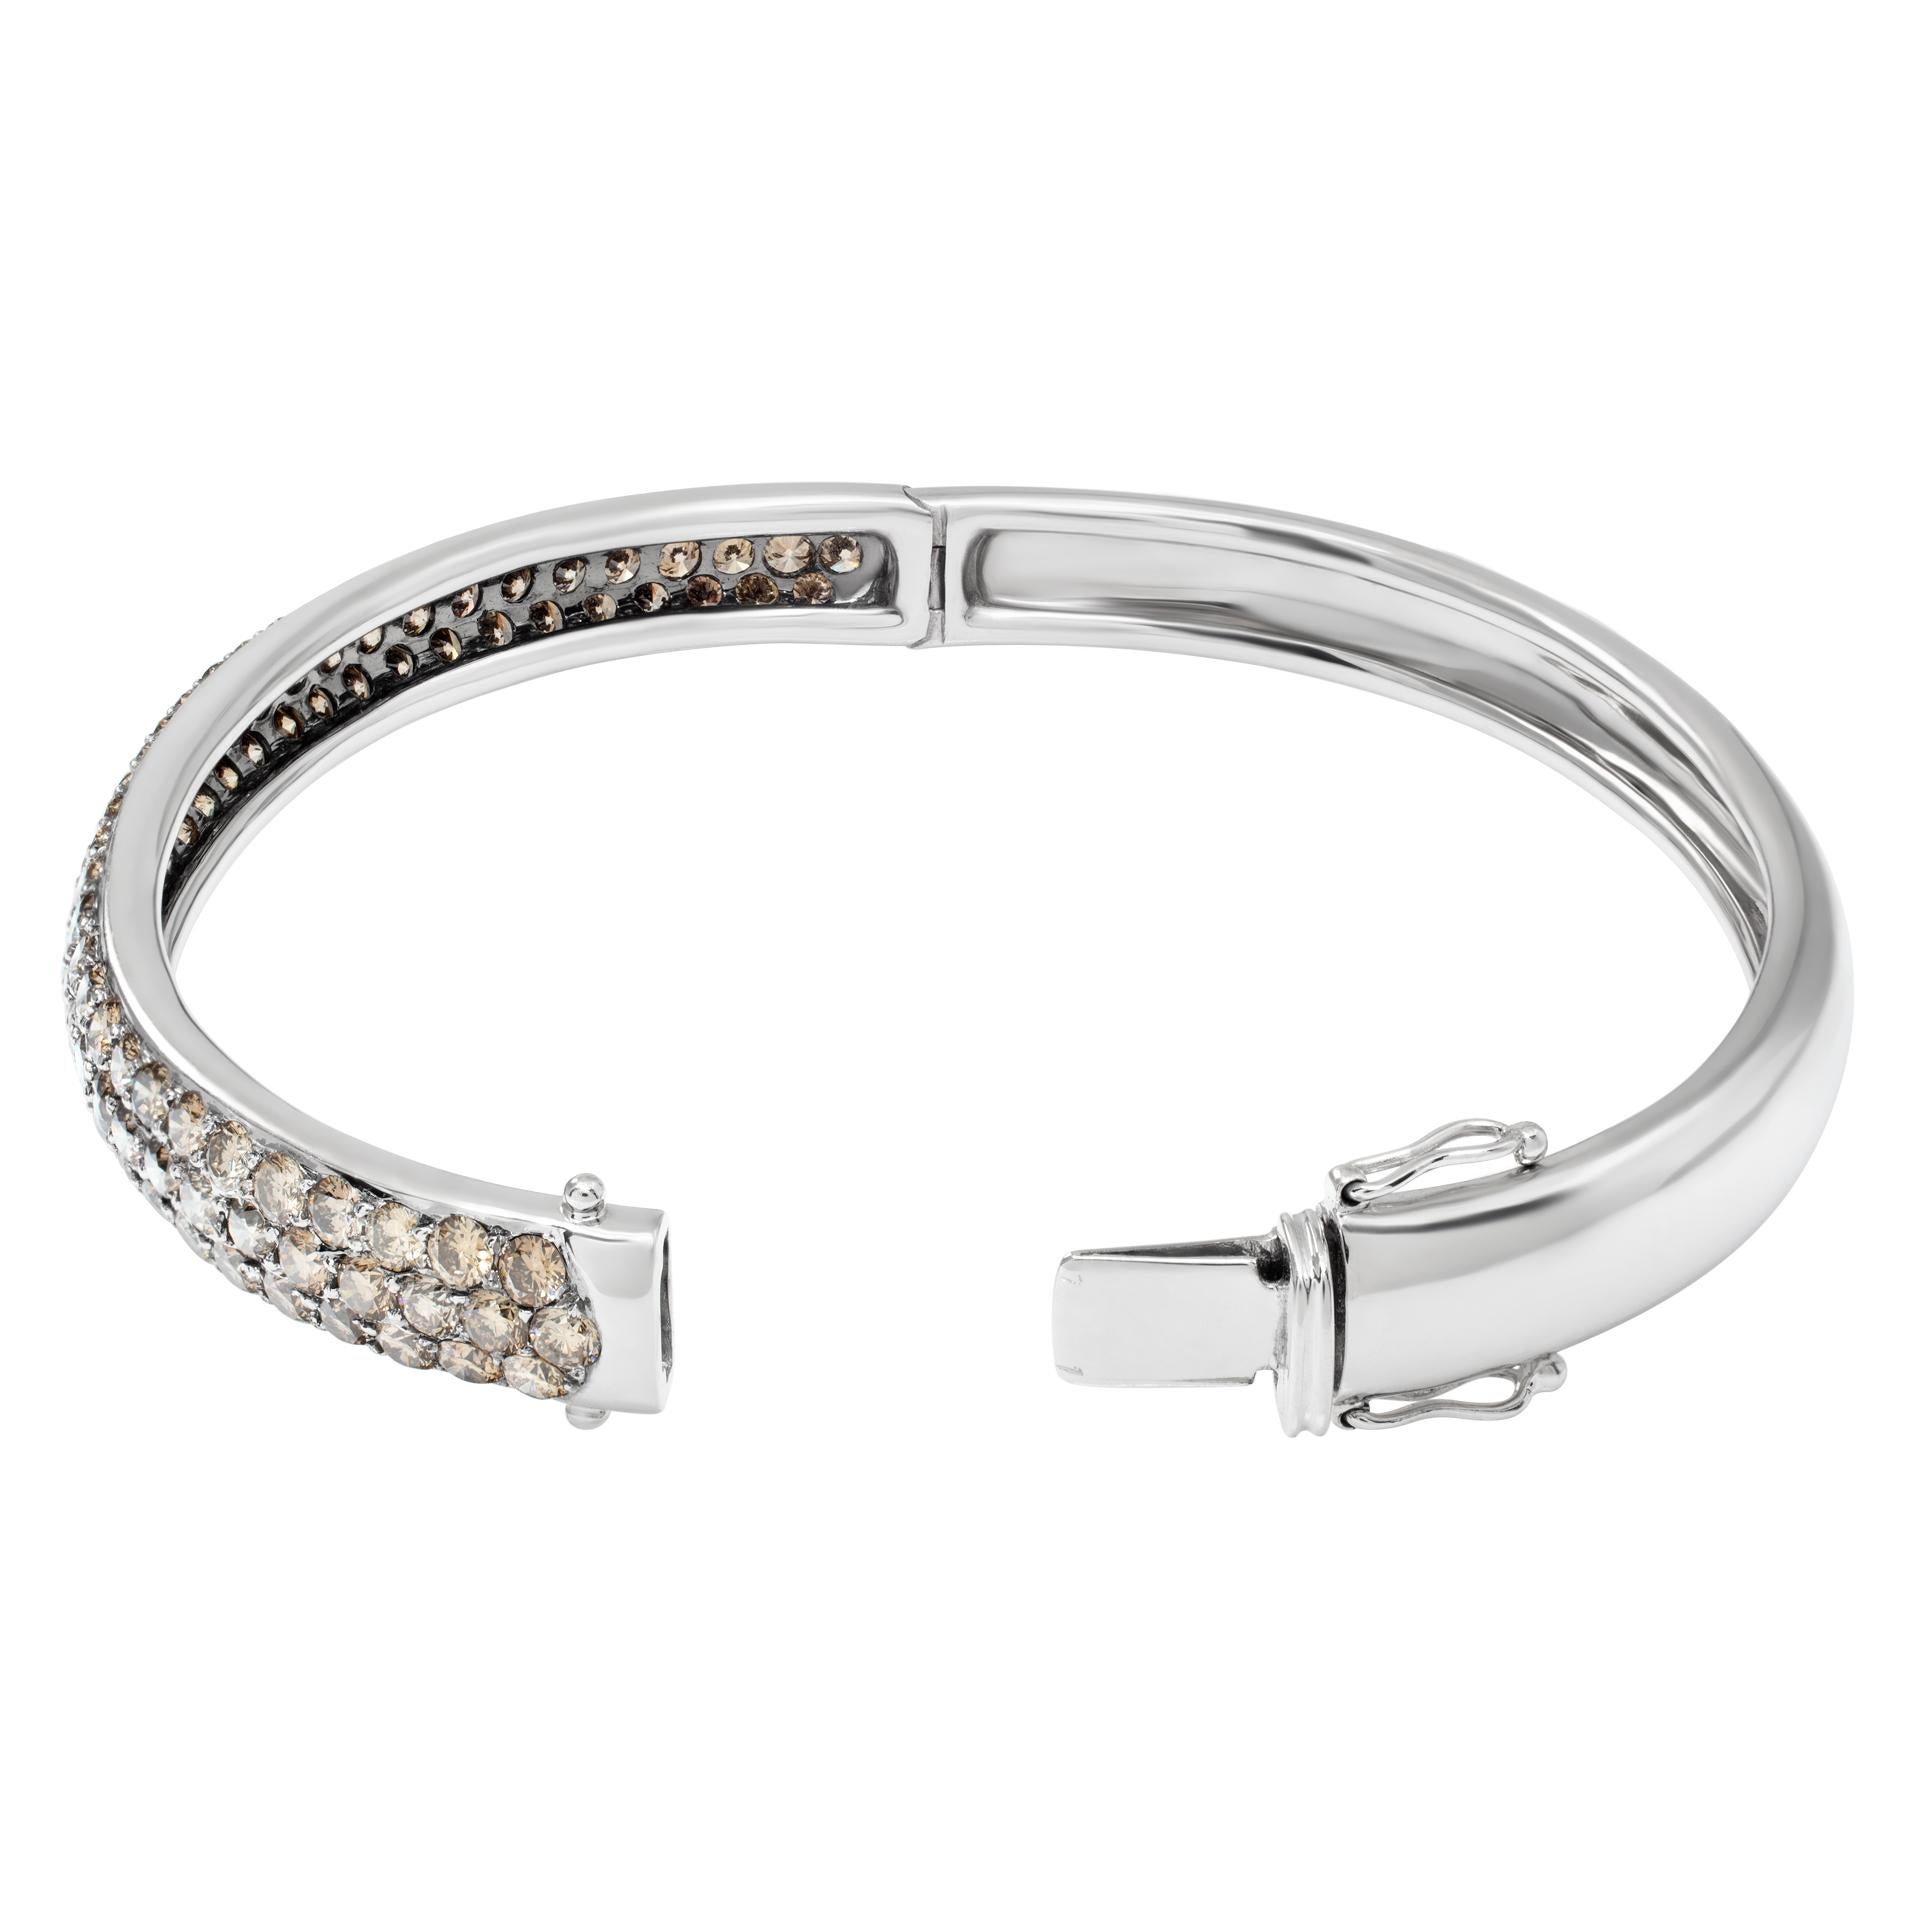 White gold bangle with brown diamonds In Excellent Condition For Sale In Surfside, FL